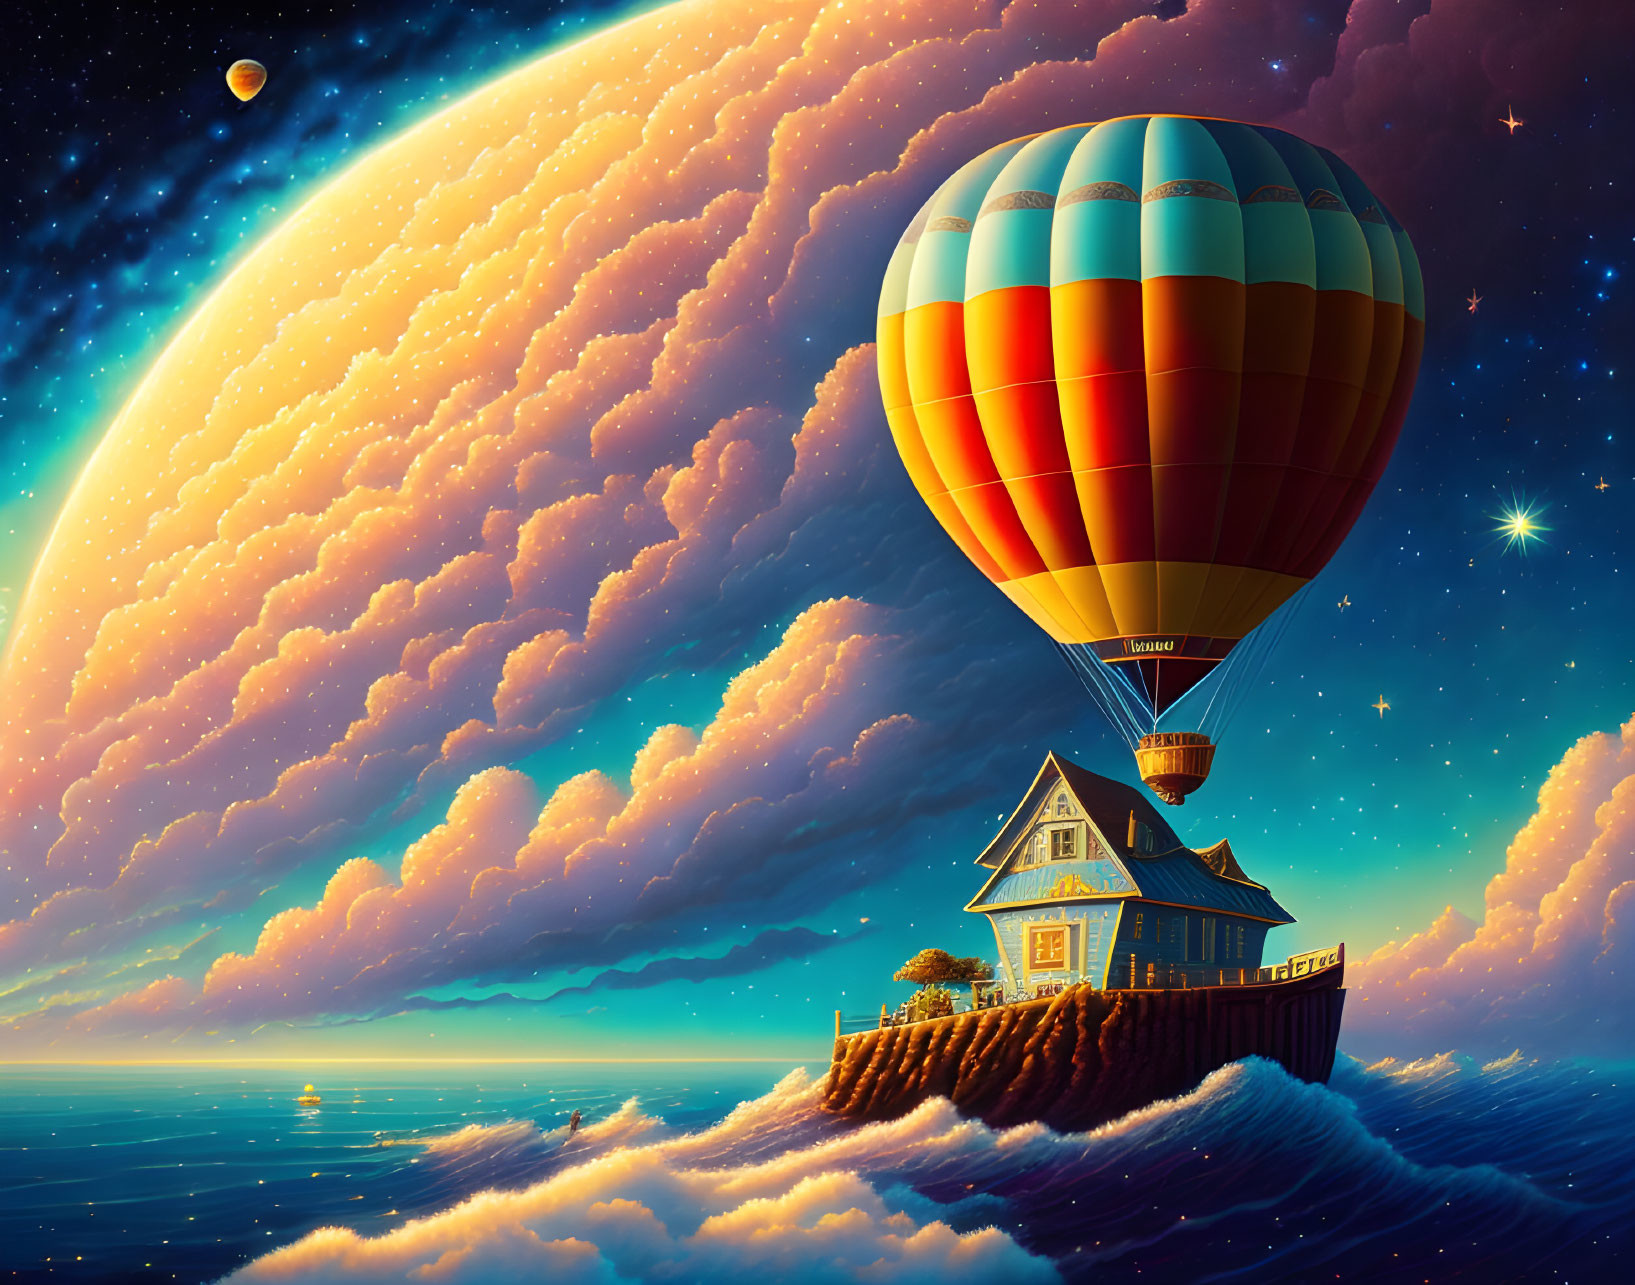  Balloon In Another World